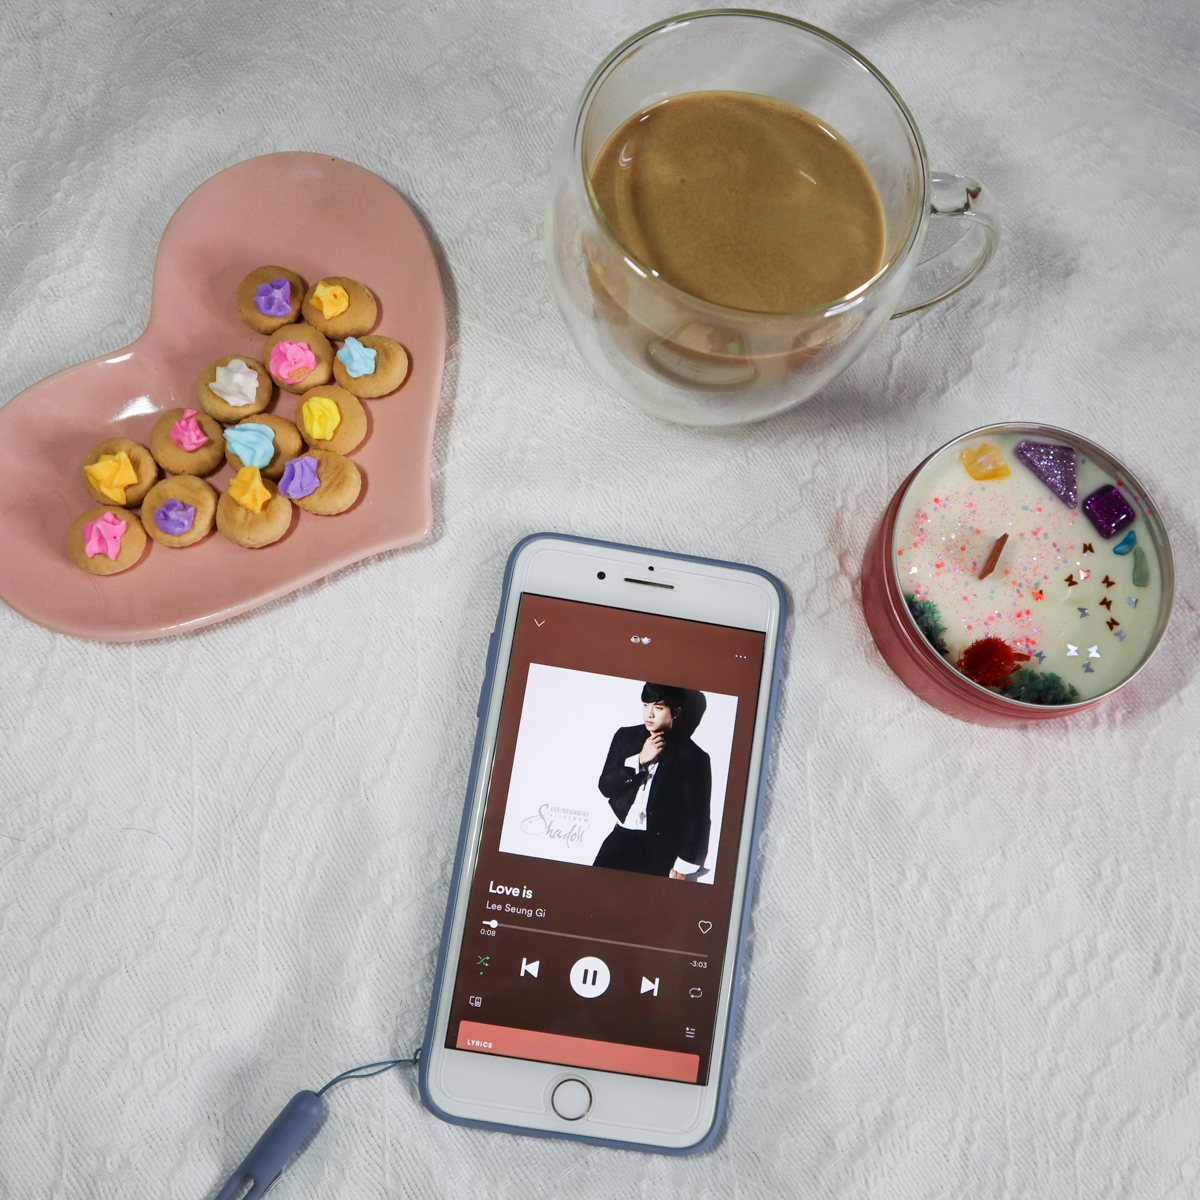 Coffee Time Playlist: Love is by Lee Seung-gi